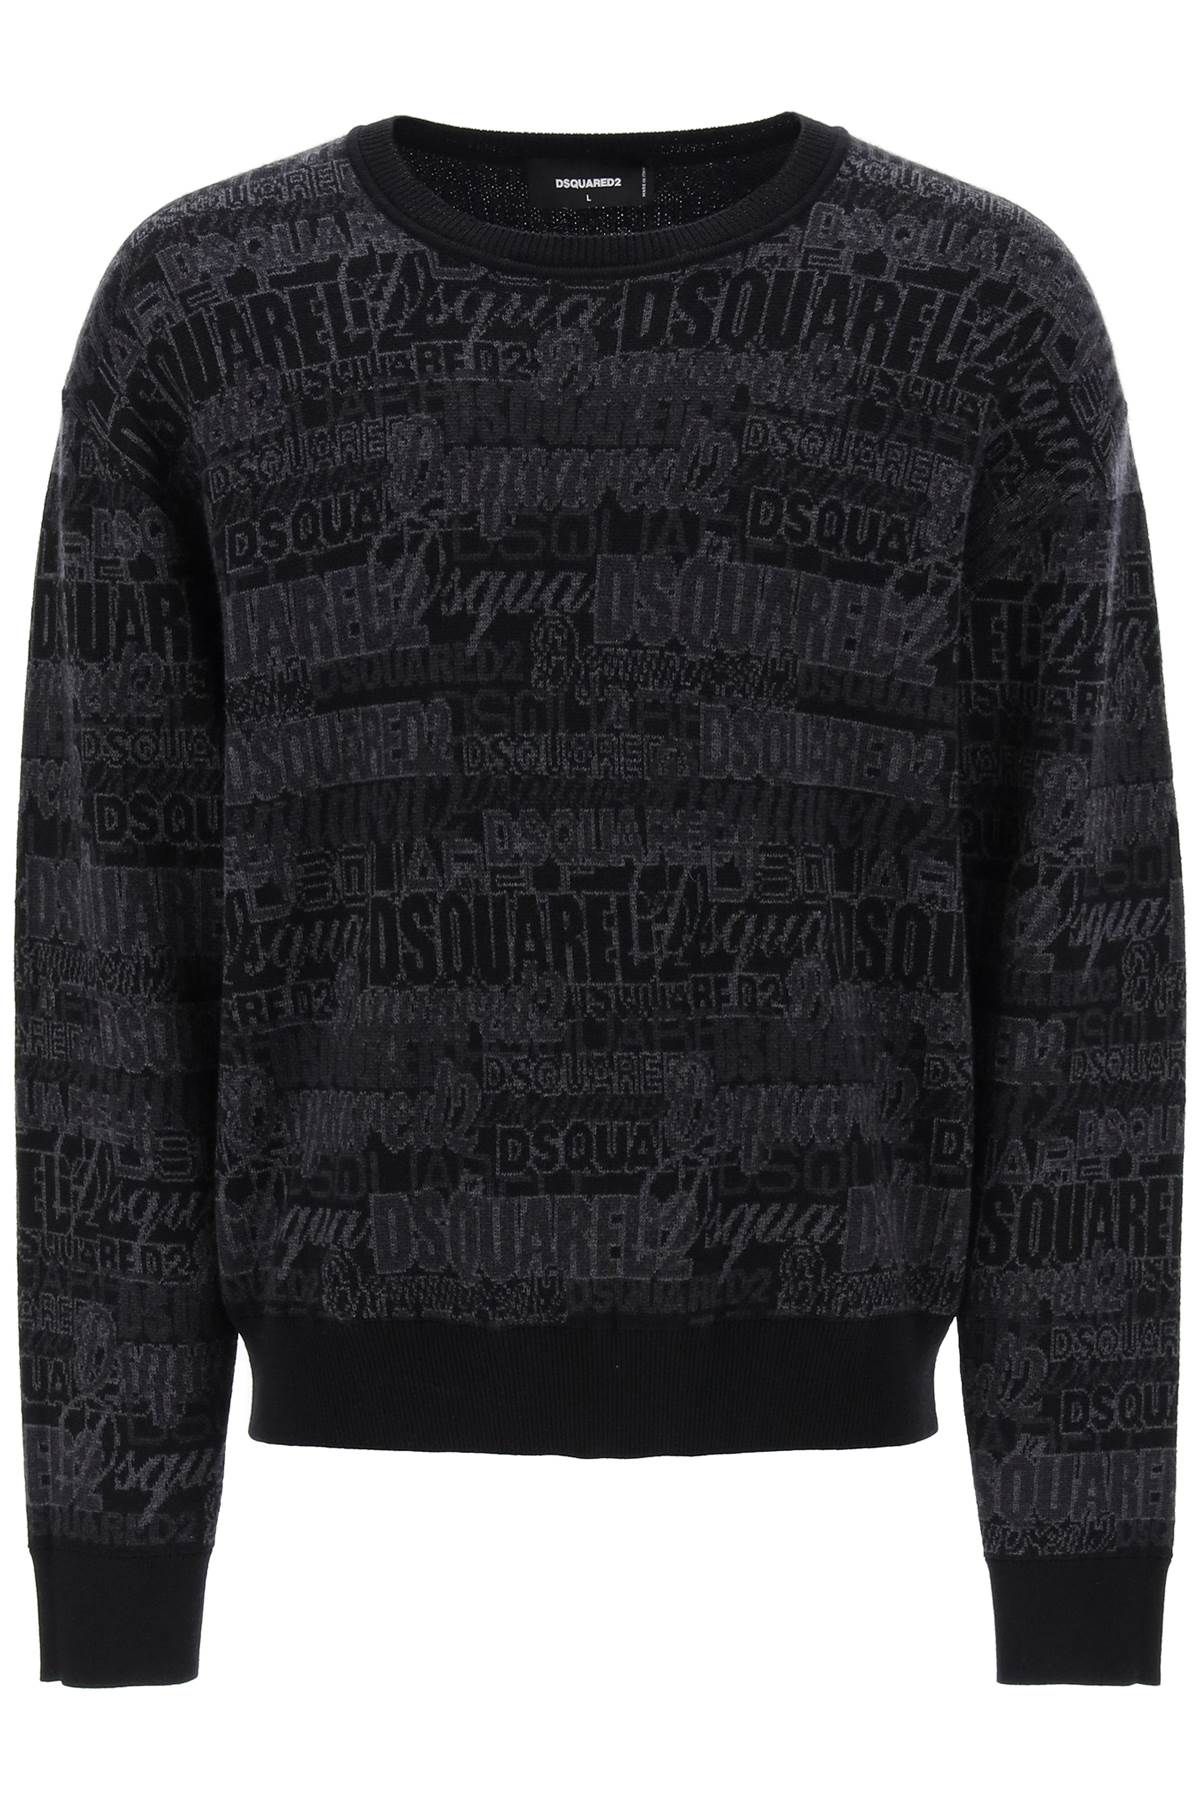 DSQUARED2 Men's Grey Wool Sweater with Logo Lettering Motif FW23